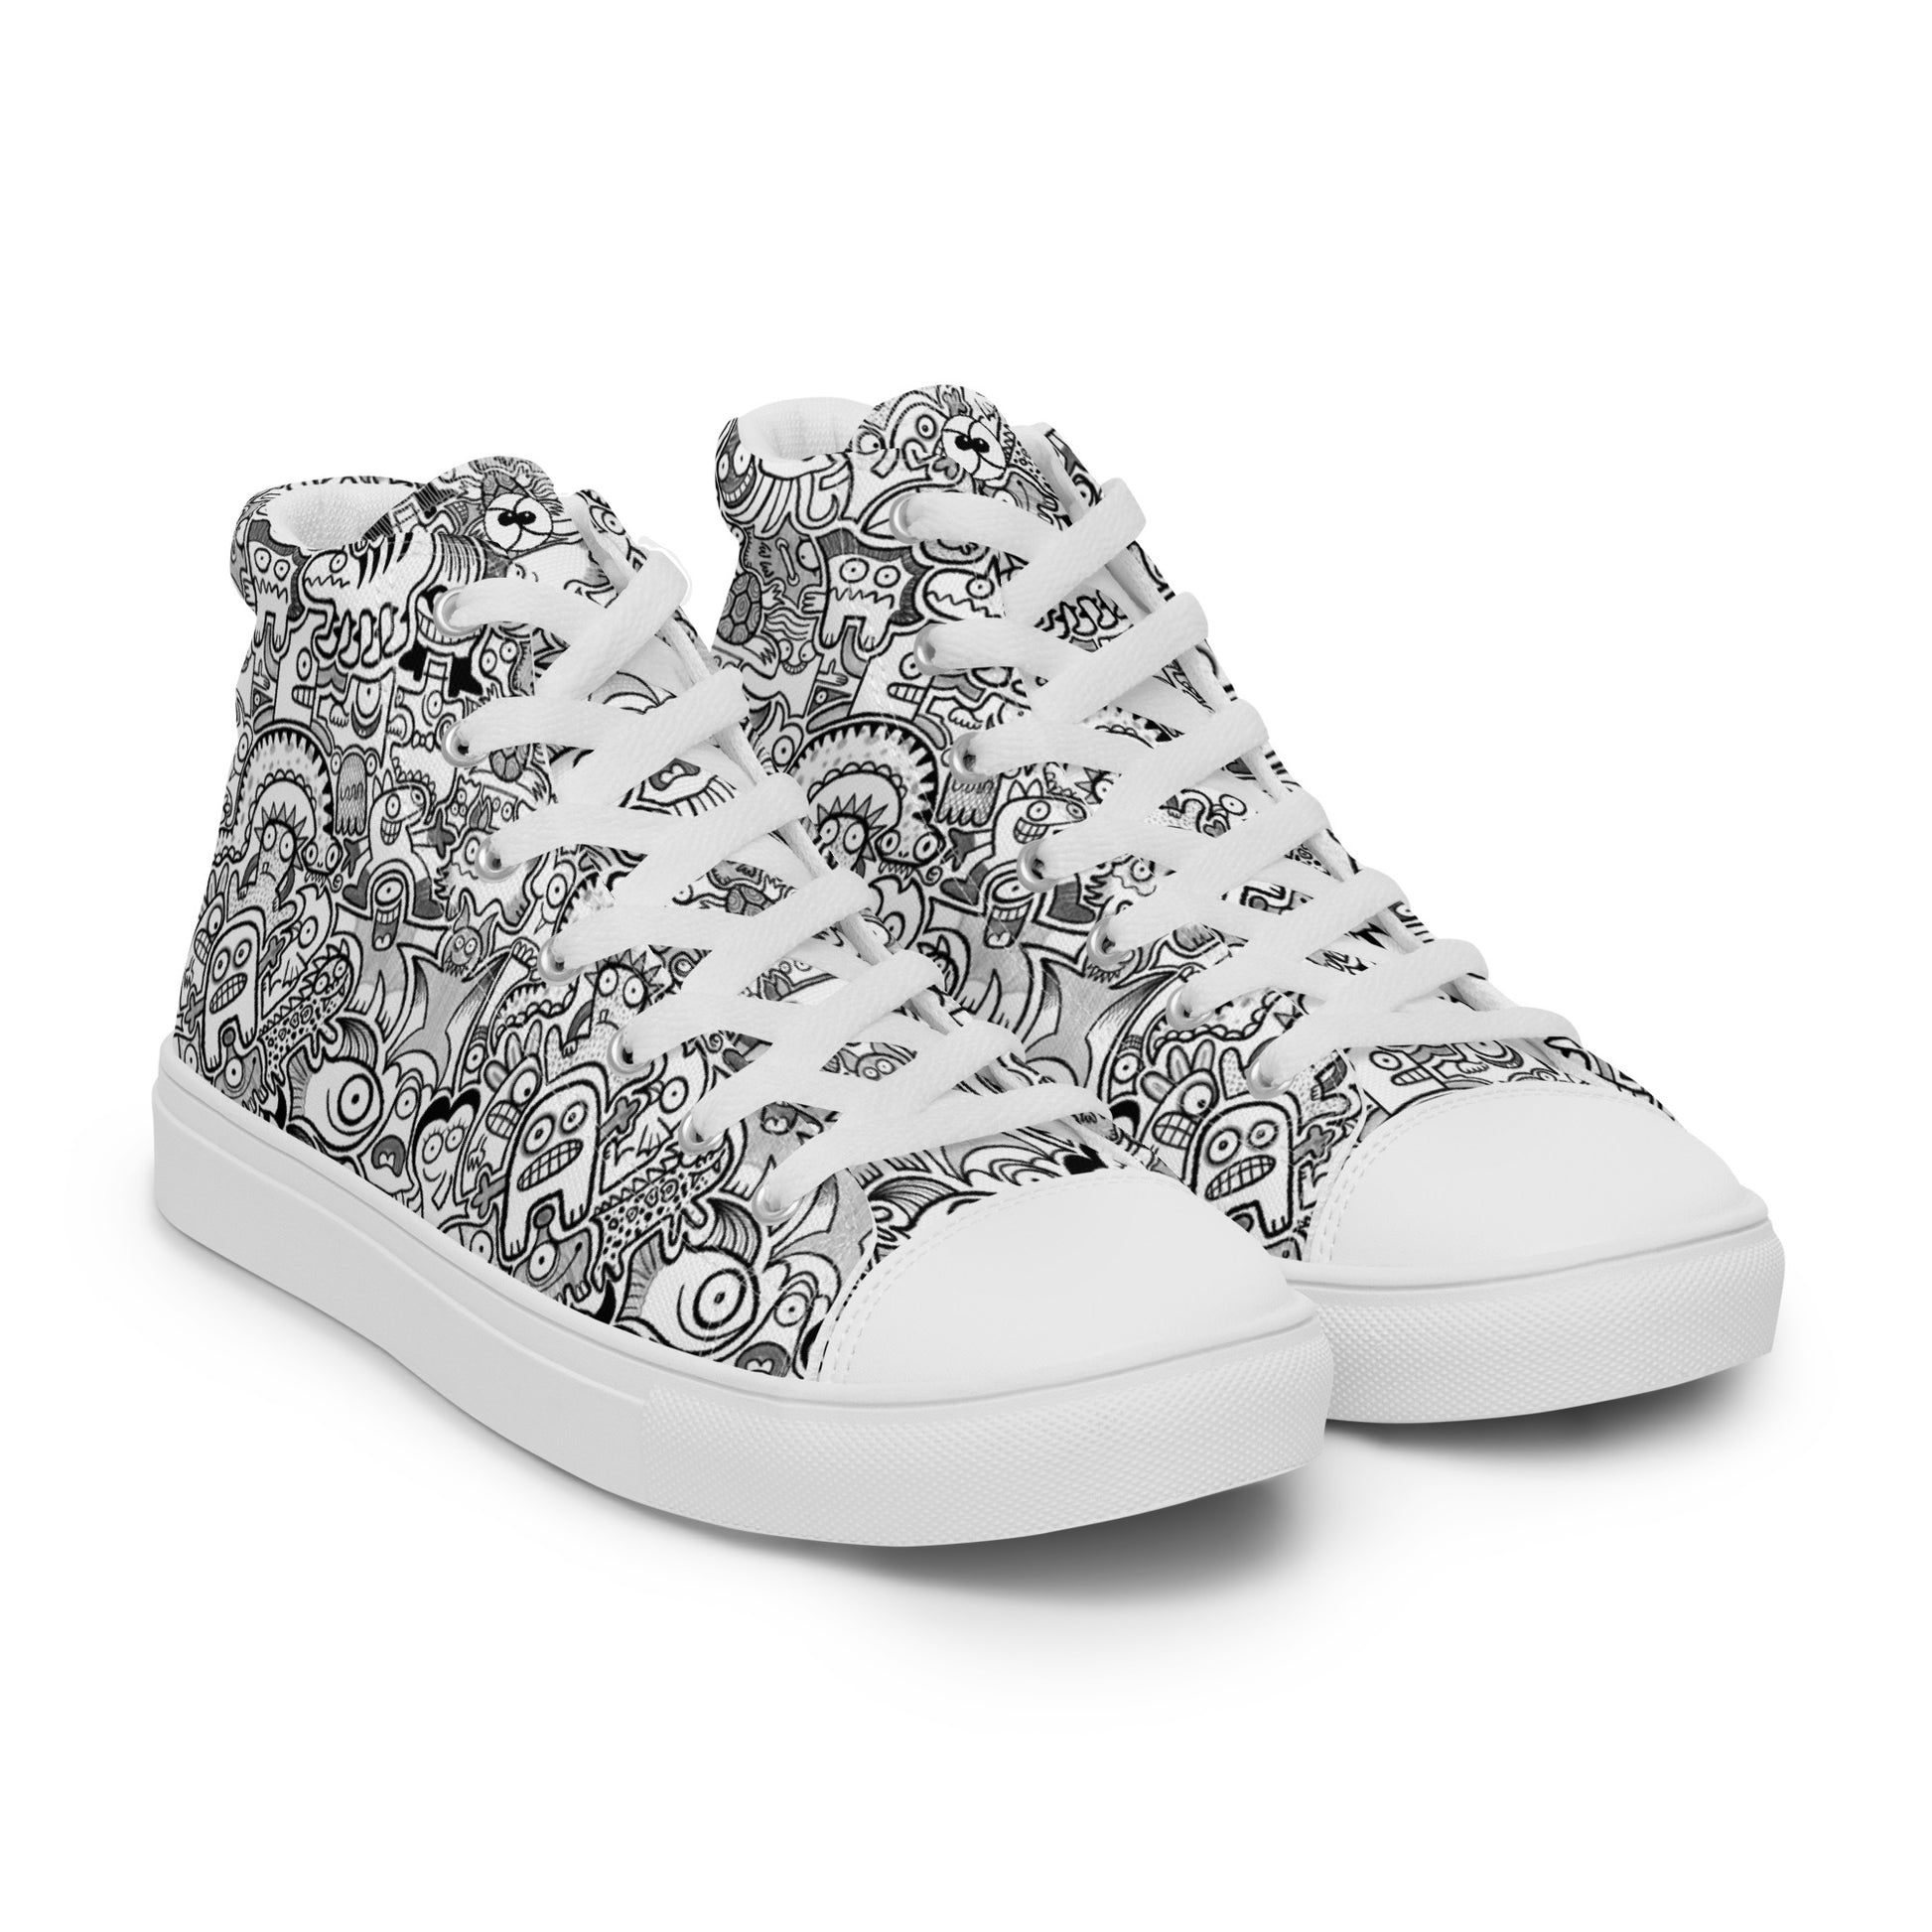 Fill your world with cool doodles Women’s high top canvas shoes. Overview